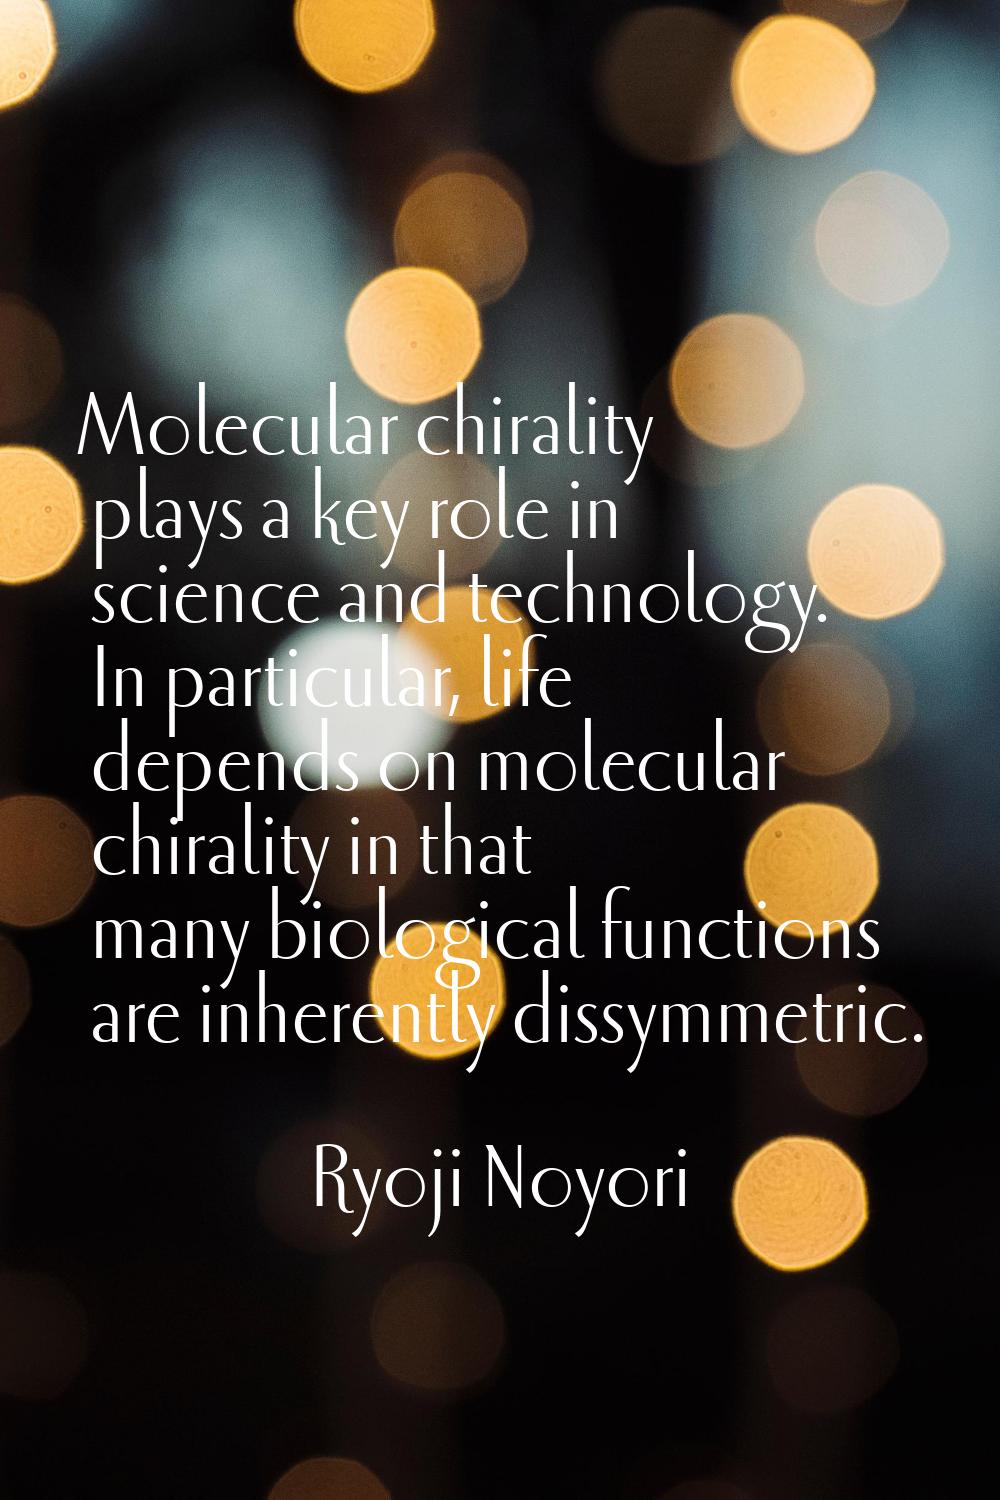 Molecular chirality plays a key role in science and technology. In particular, life depends on mole